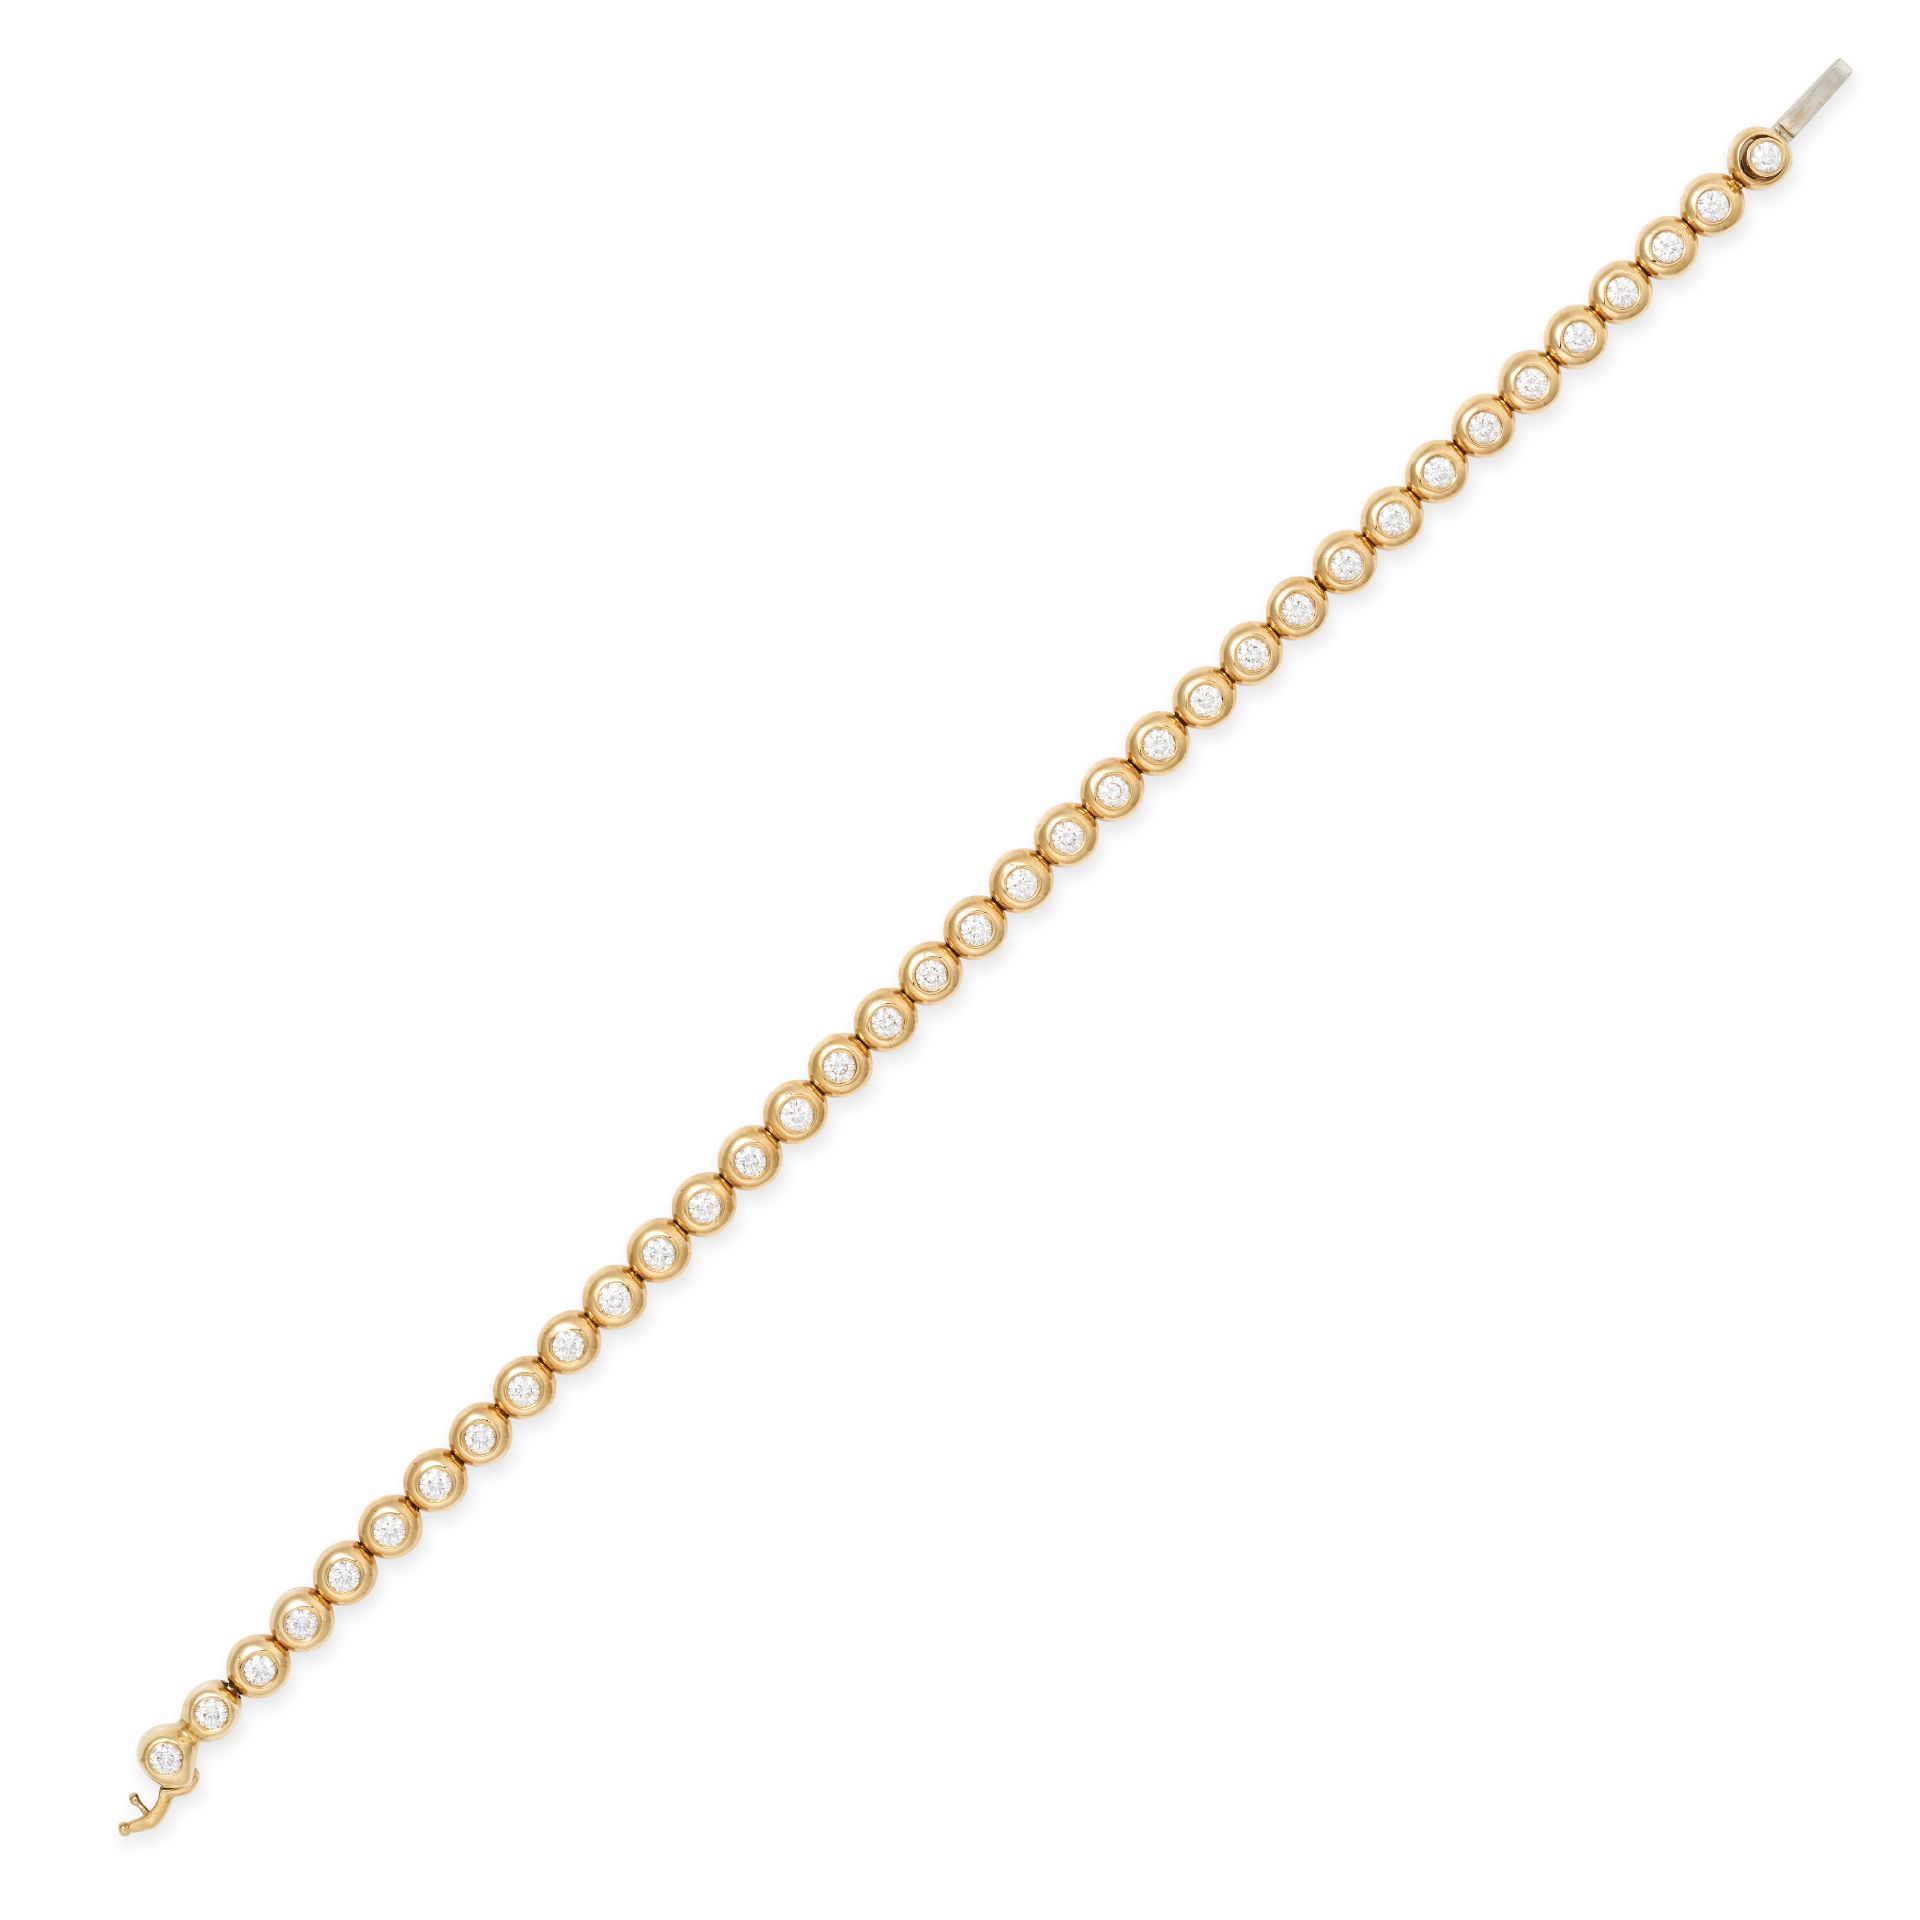 TIFFANY & CO, A DIAMOND JAZZ BRACELET in 18ct yellow gold, comprising a line of round brilliant c...